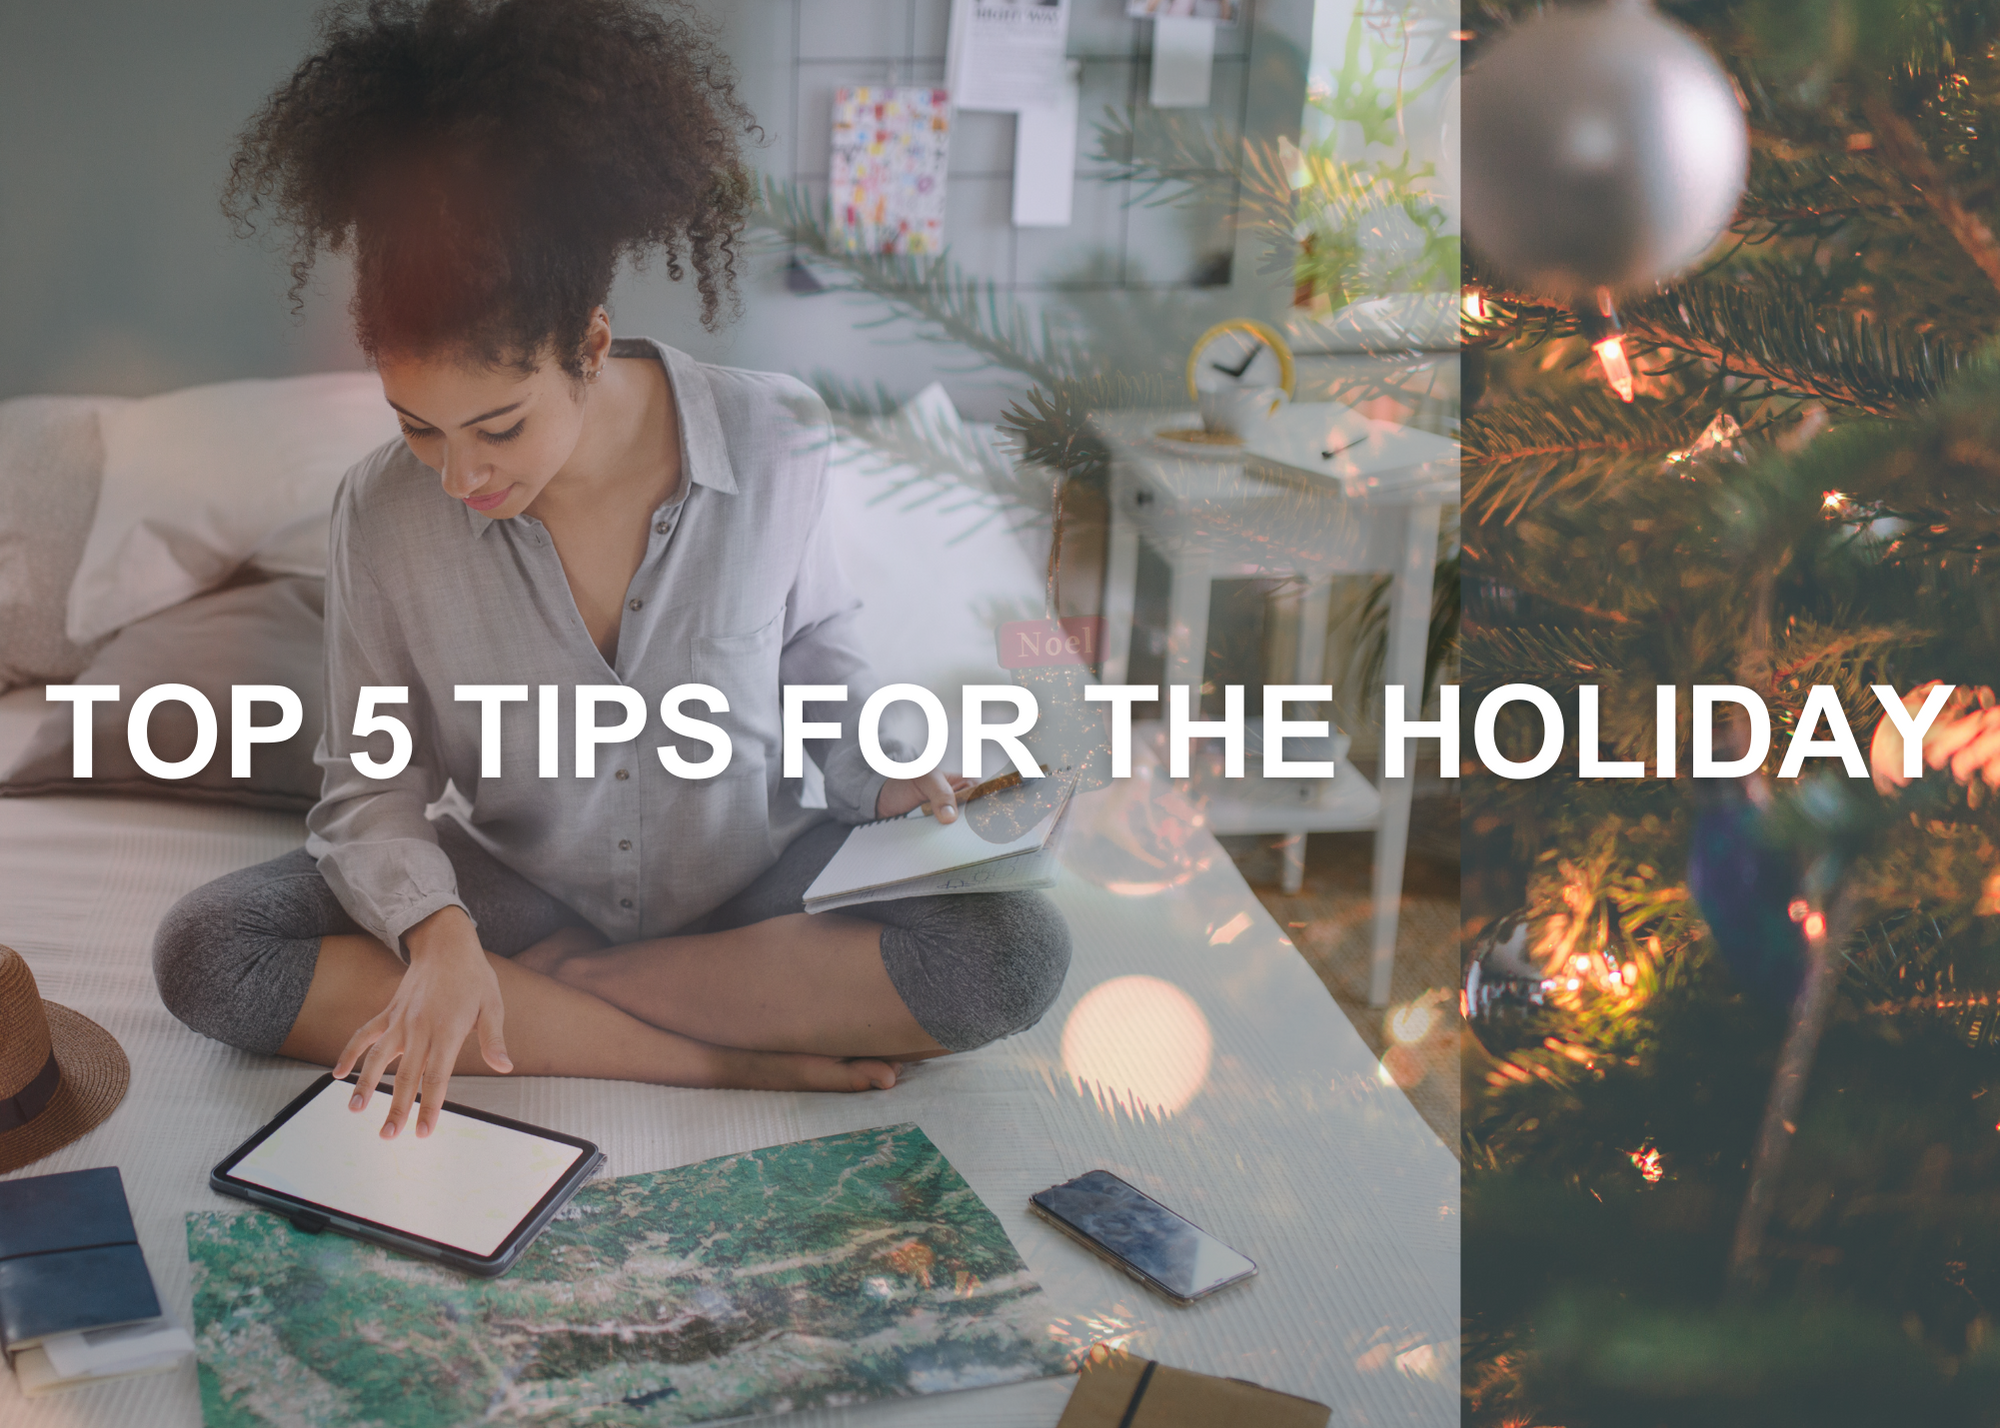 Top 5 Tips for Holiday Planning